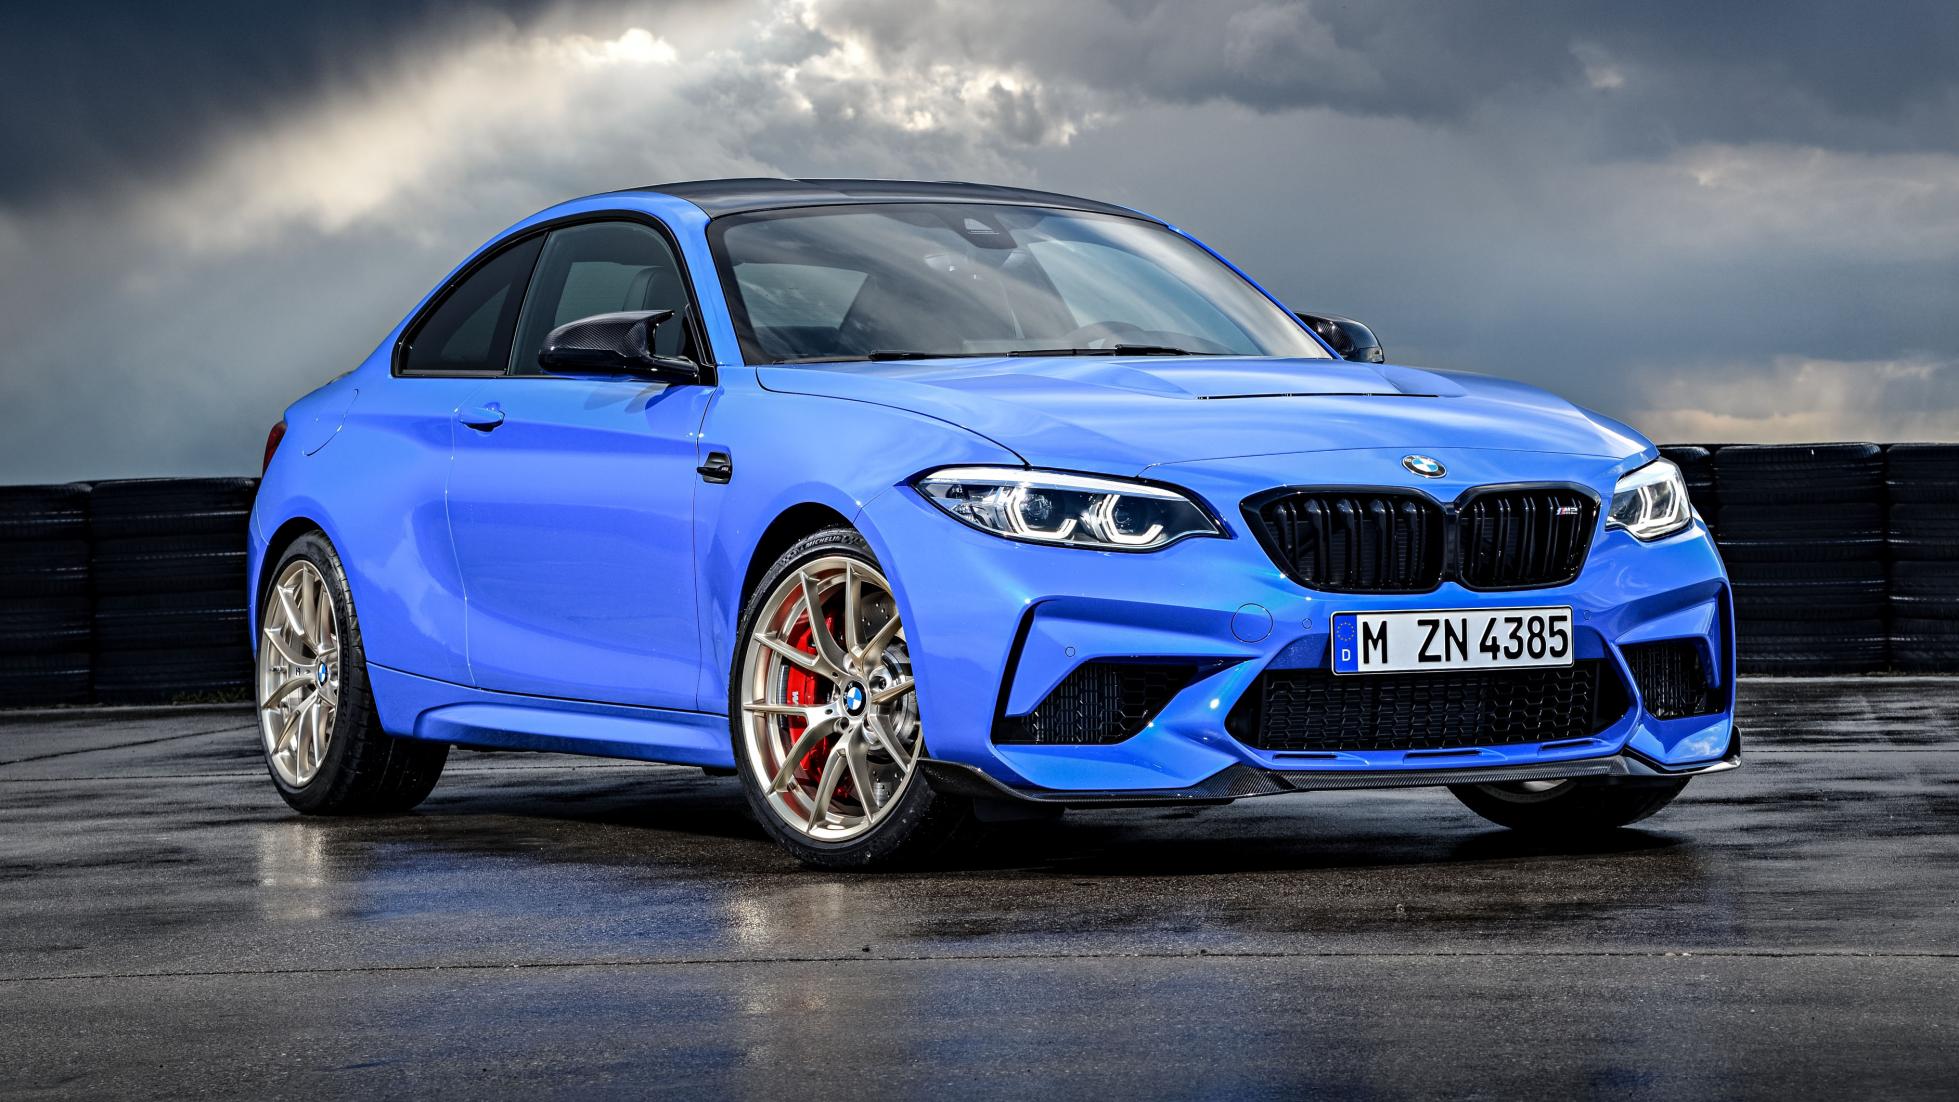 The 444bhp BMW M2 CS is here to bring balance to the Force